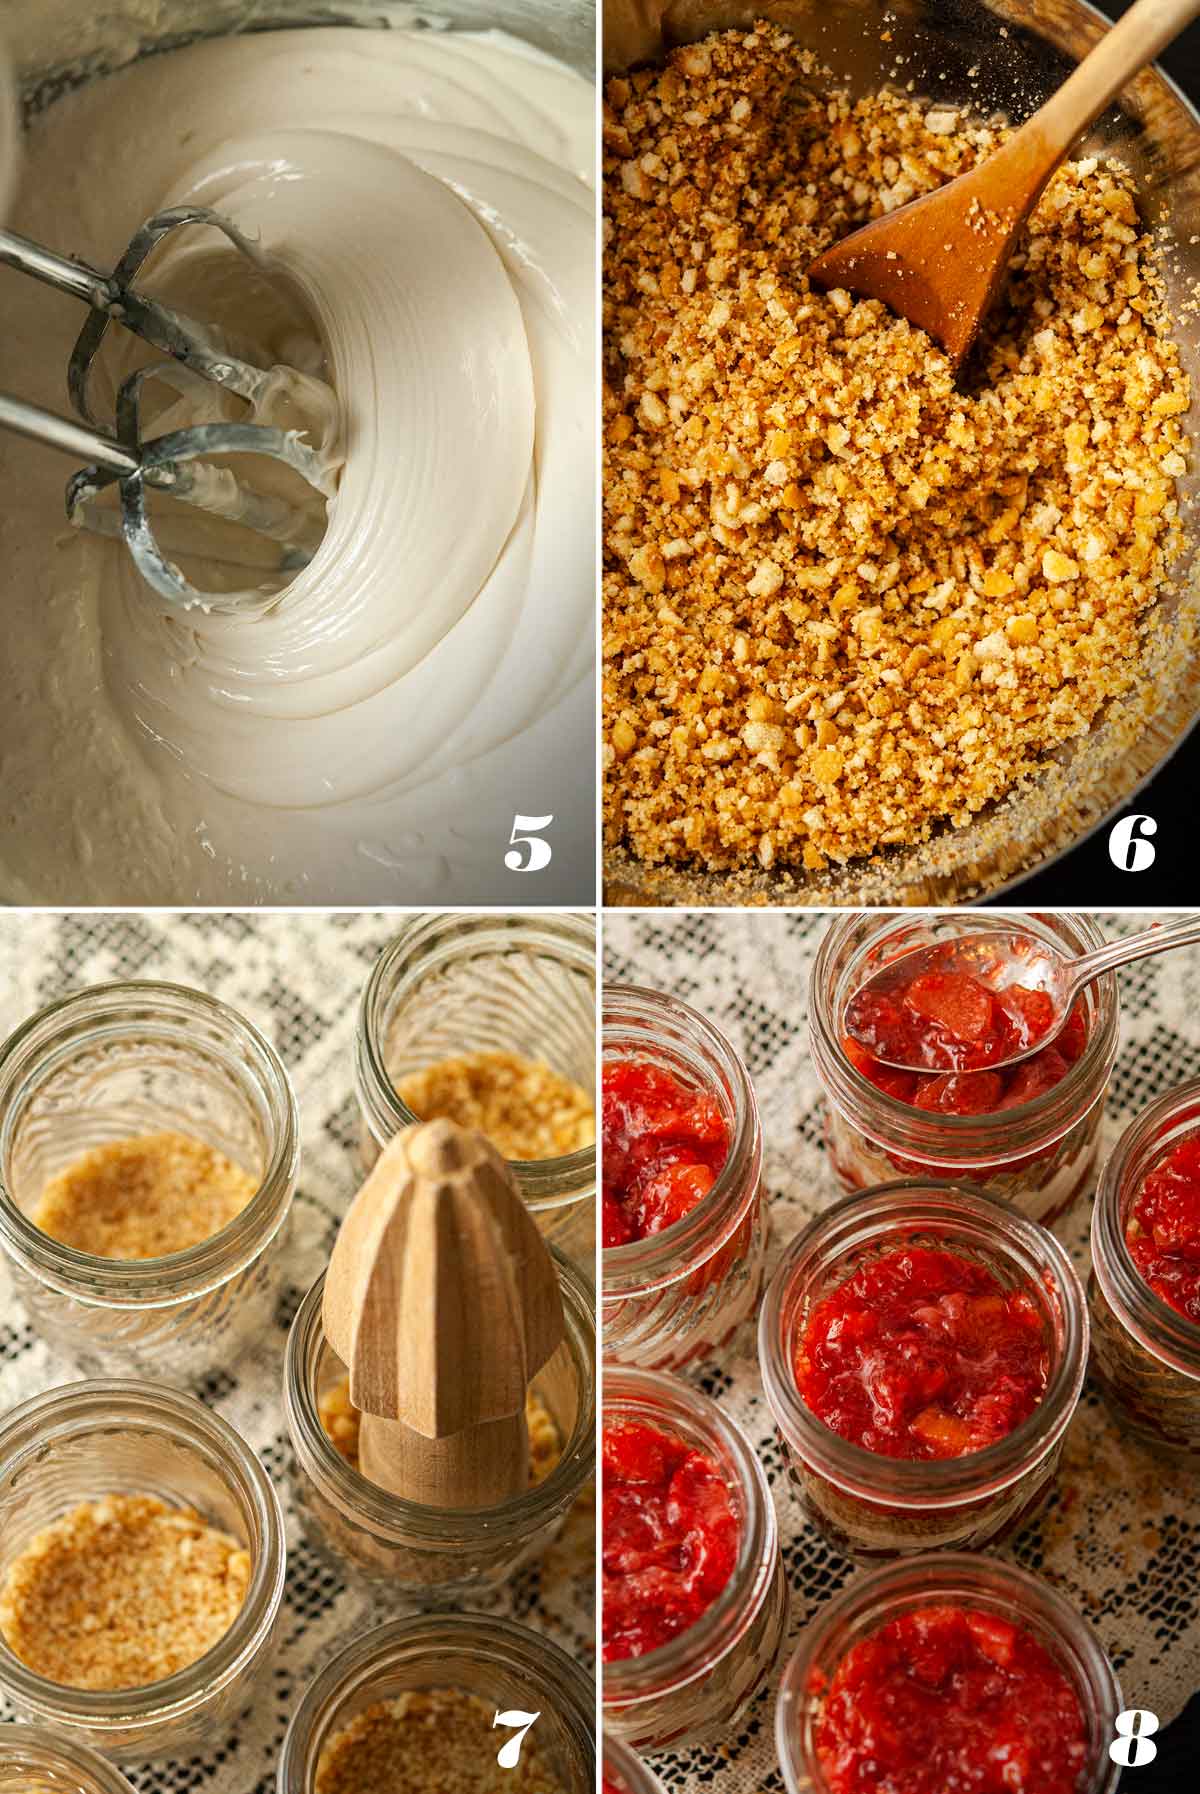 A collage of 4 numbered images showing how to fill cups with ingredients.